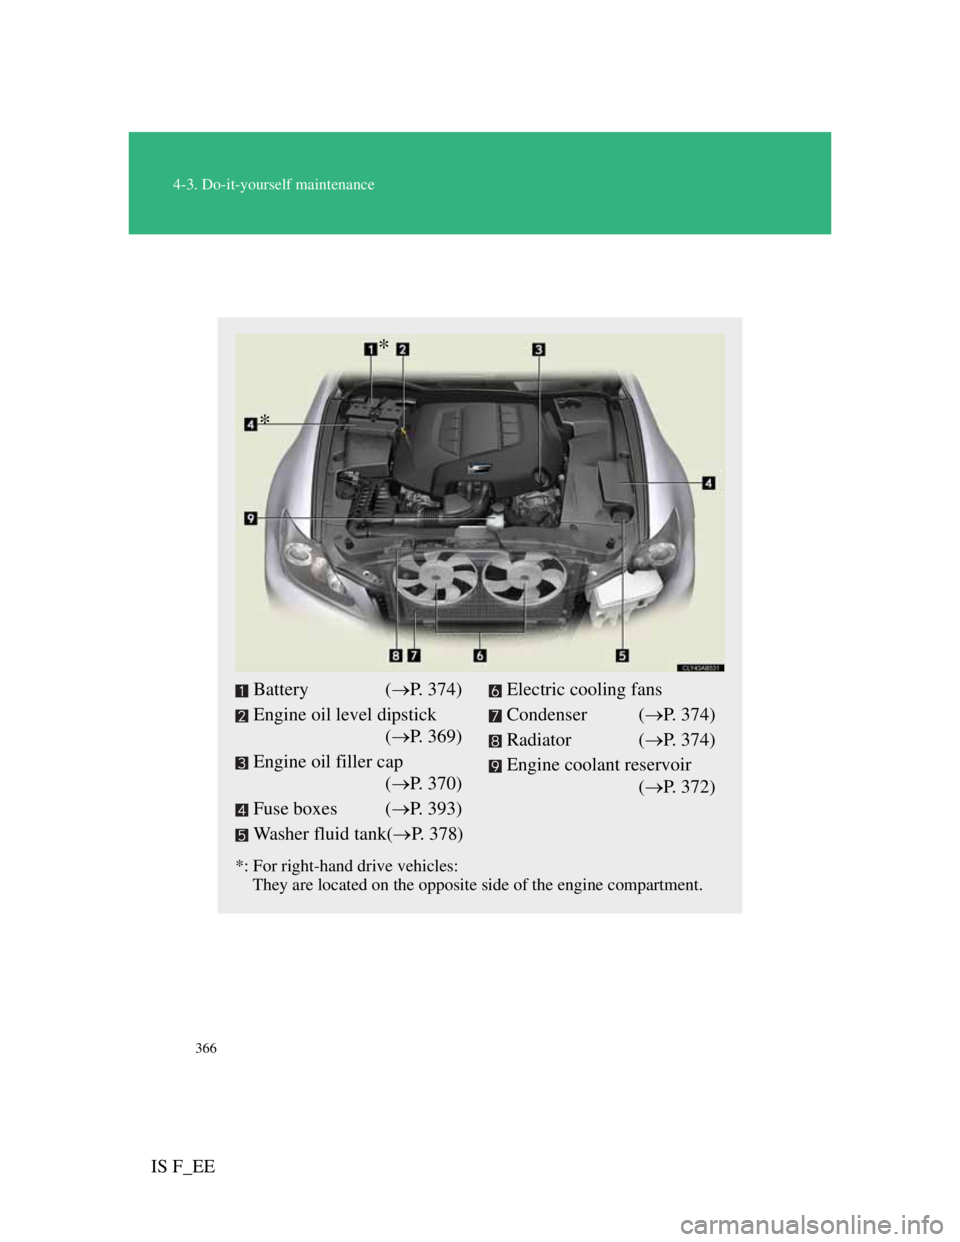 Lexus IS F 2011  Owners Manual 366
4-3. Do-it-yourself maintenance
IS F_EE
Engine compartment
*: For right-hand drive vehicles: 
    They are located on the opposite side of the engine compartment.
Battery (P. 374)
Engine oil le